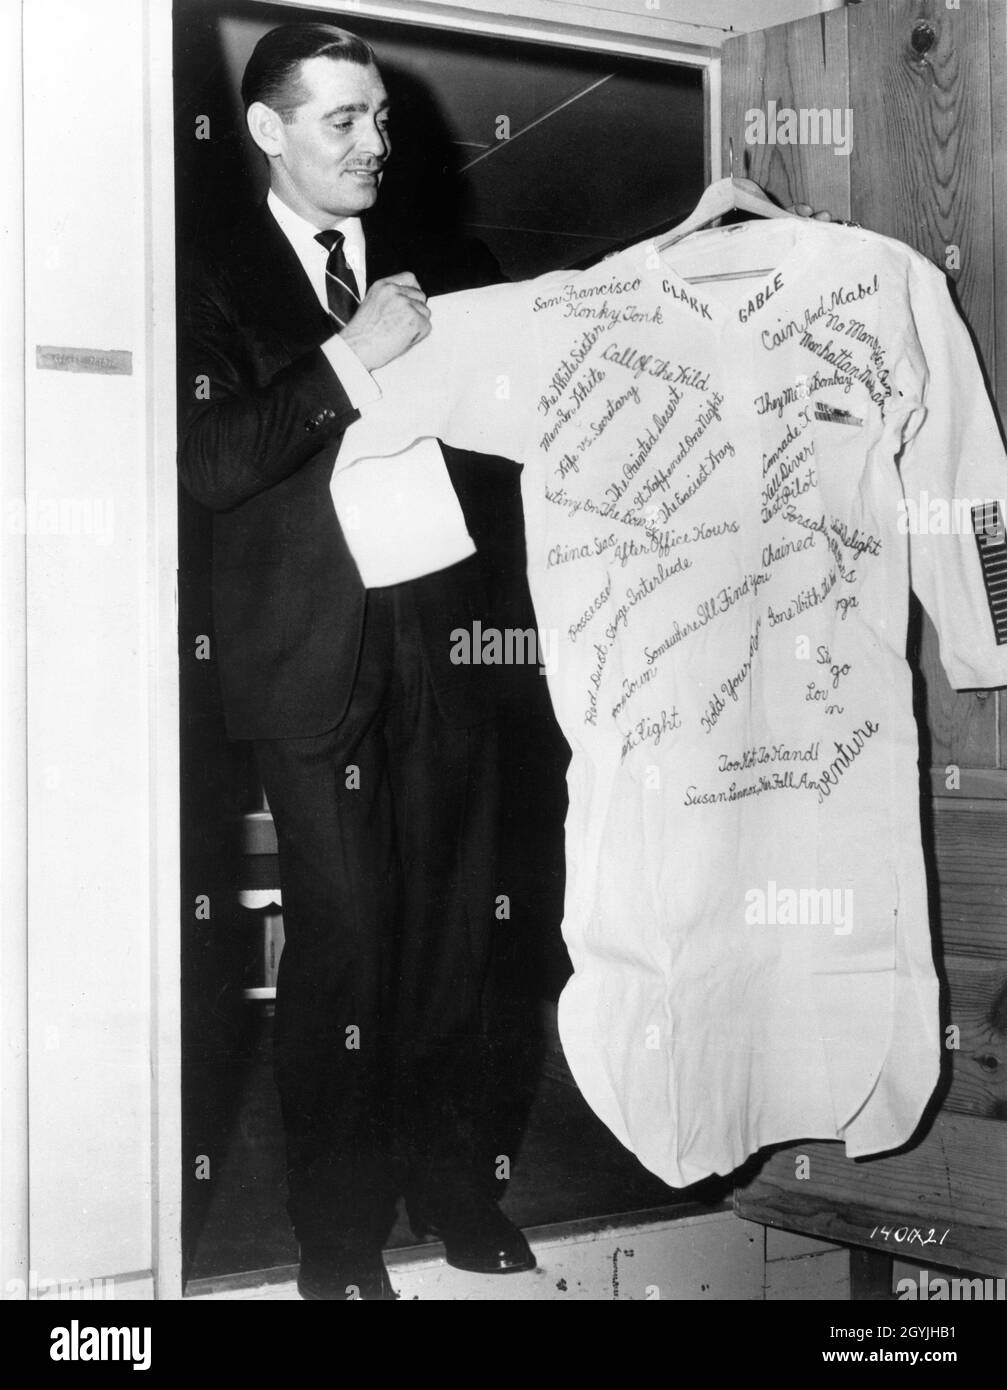 CLARK GABLE standing at the door of his Portable Dressing Room holding an embroidered night shirt listing all his films given as a 46th Birthday Gift during filming of THE HUCKSTERS 1947 director JACK CONWAY novel Frederick Wakeman costume supervisor Irene producer Arthur Hornblow Jr. Metro Goldwyn Mayer Stock Photo